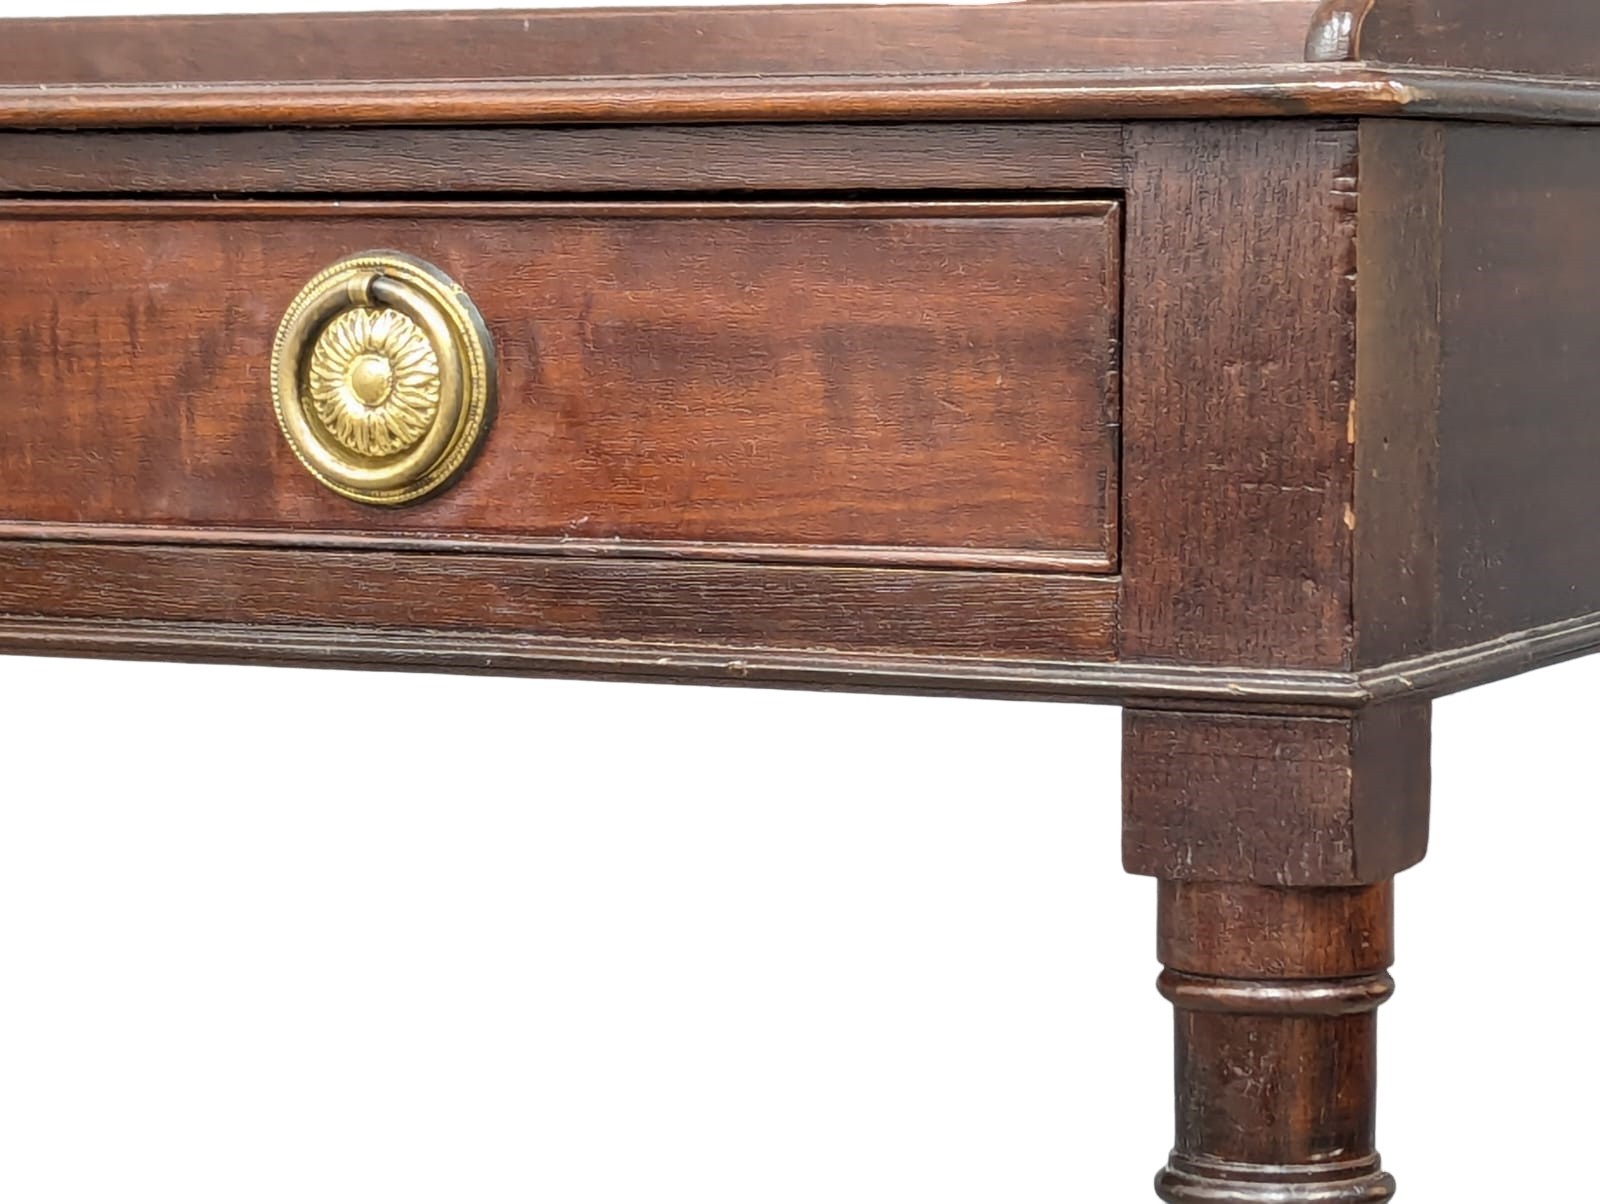 A Victorian mahogany gallery back hall table with 2 drawers with turned tapering legs. 79.5x38x78cm - Image 3 of 6